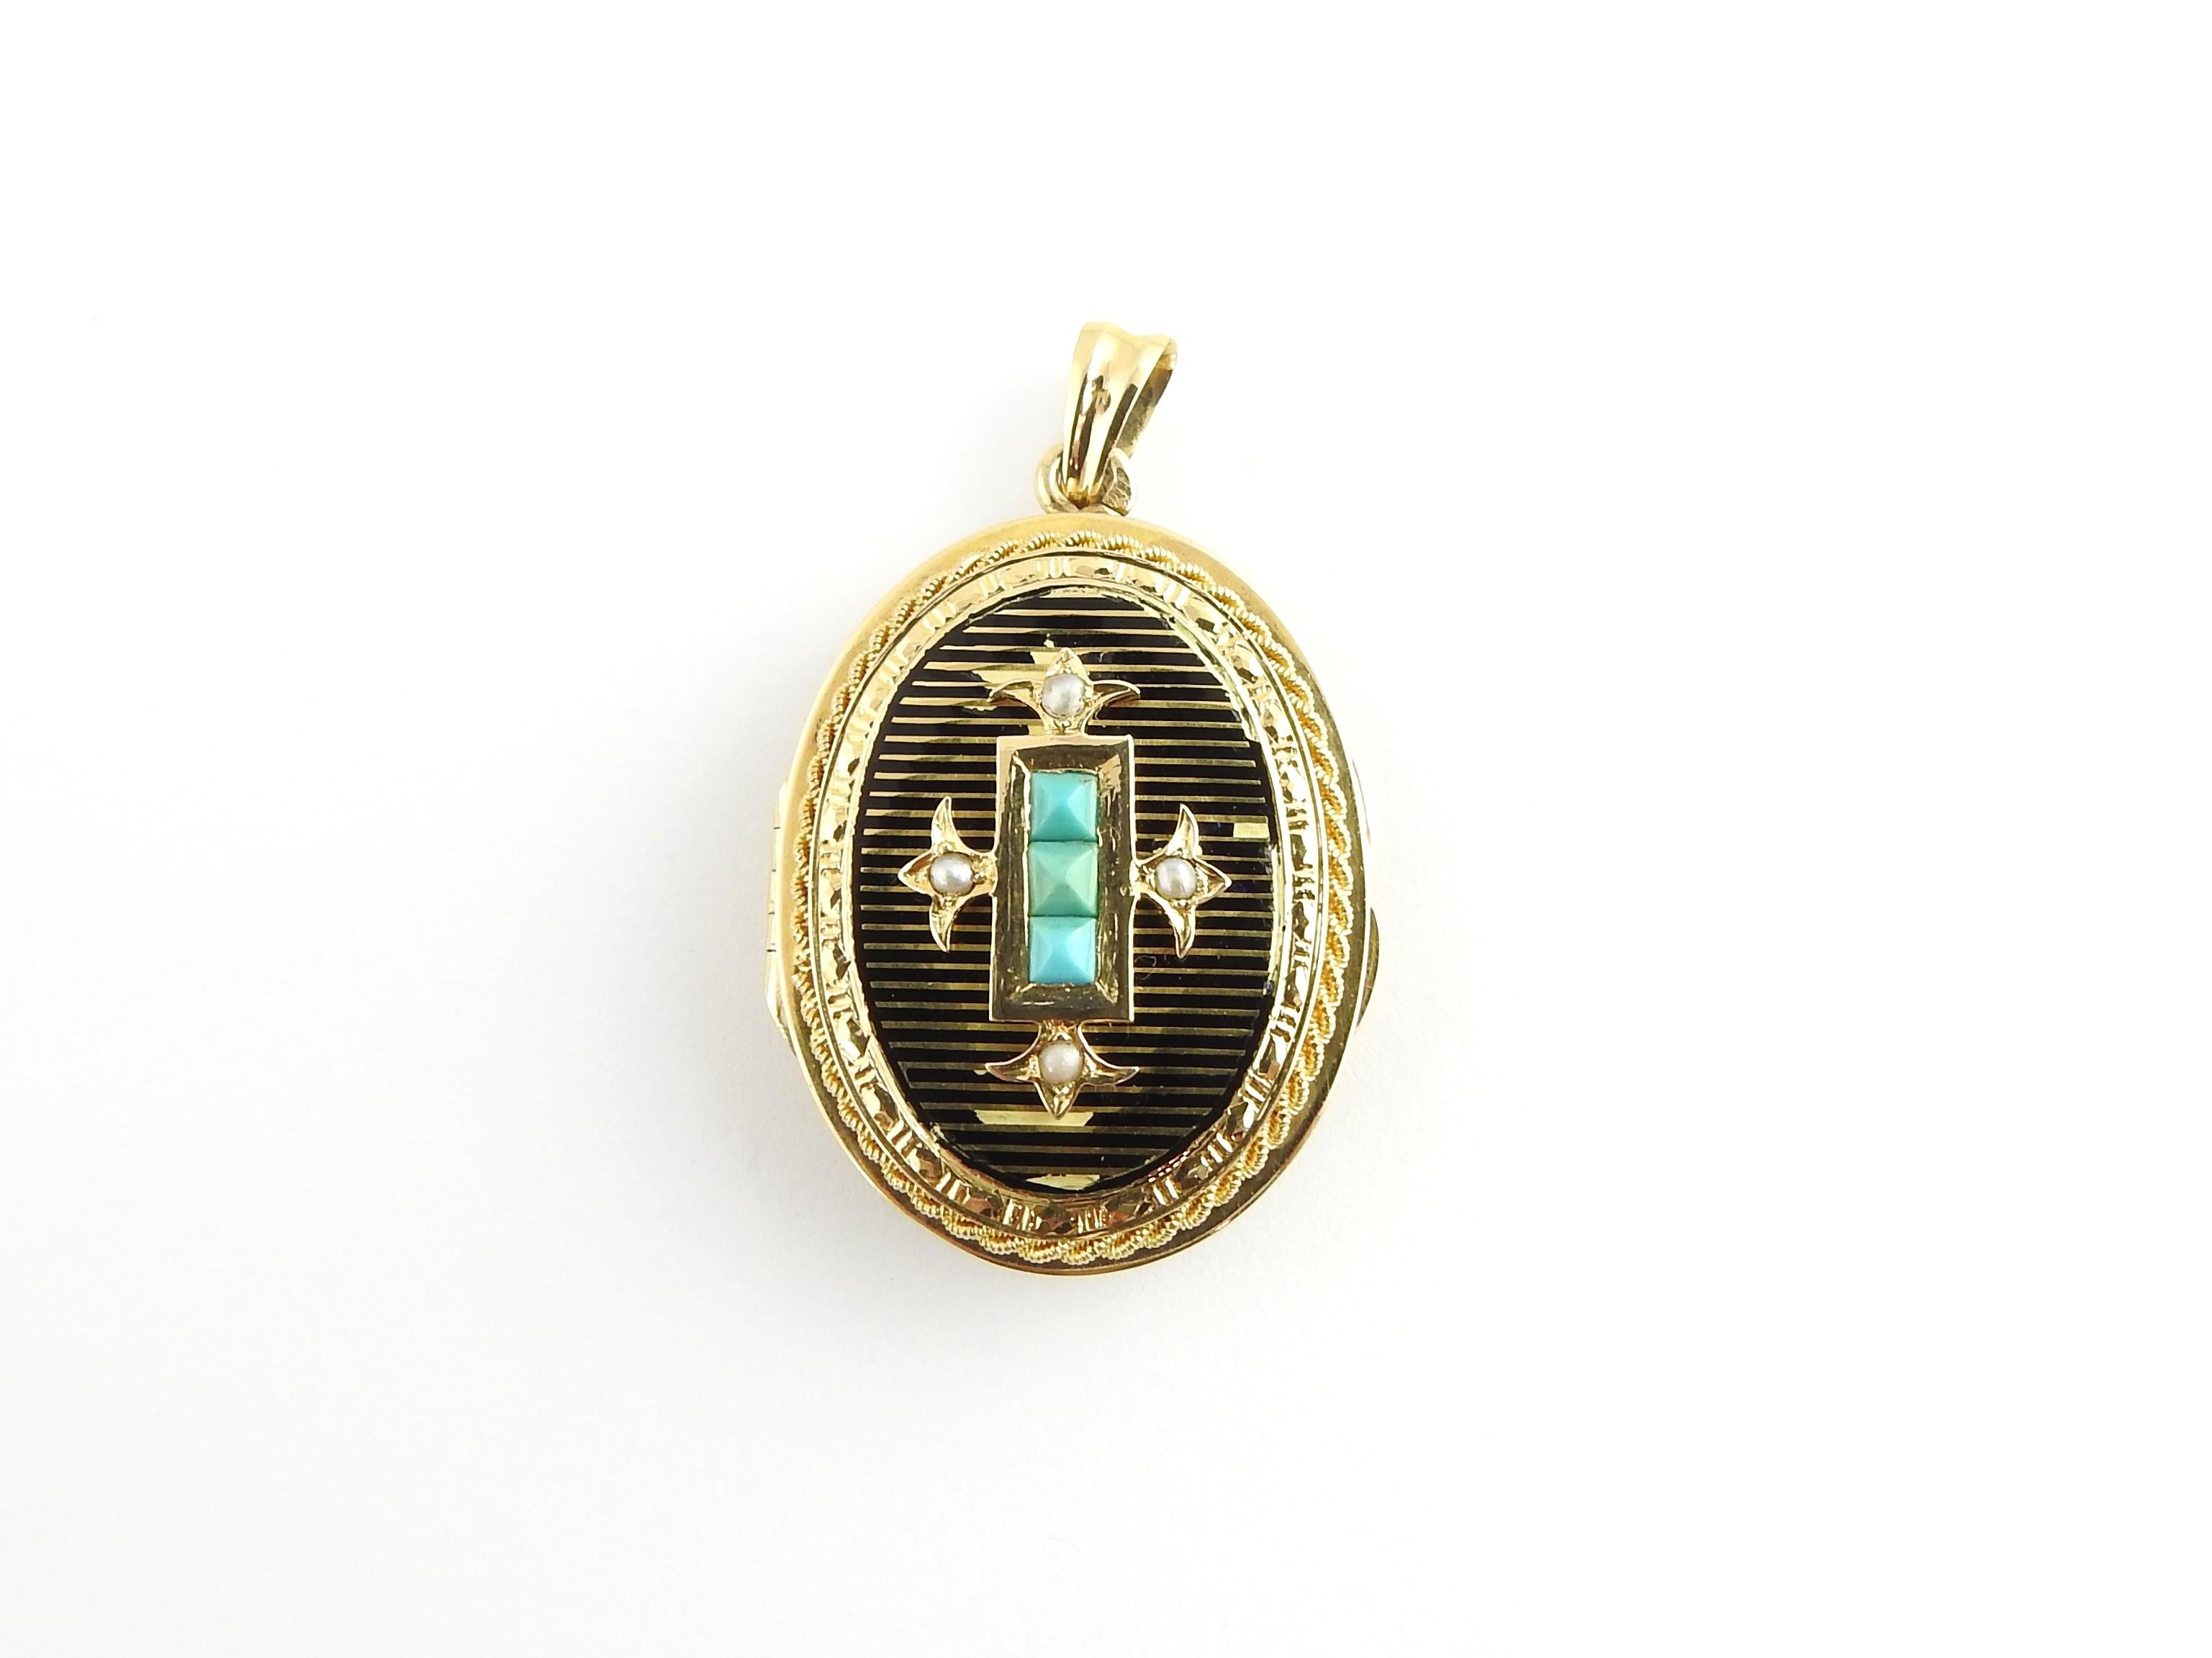 Antique Victorian 14 Karat Yellow Gold Mourning Hair Locket

This stunning hinged locket opens to reveal a long ago loved one's hair preserved under glass. Its ornate cover is decorated with three square turquoise stones and four seed pearls.

Size: